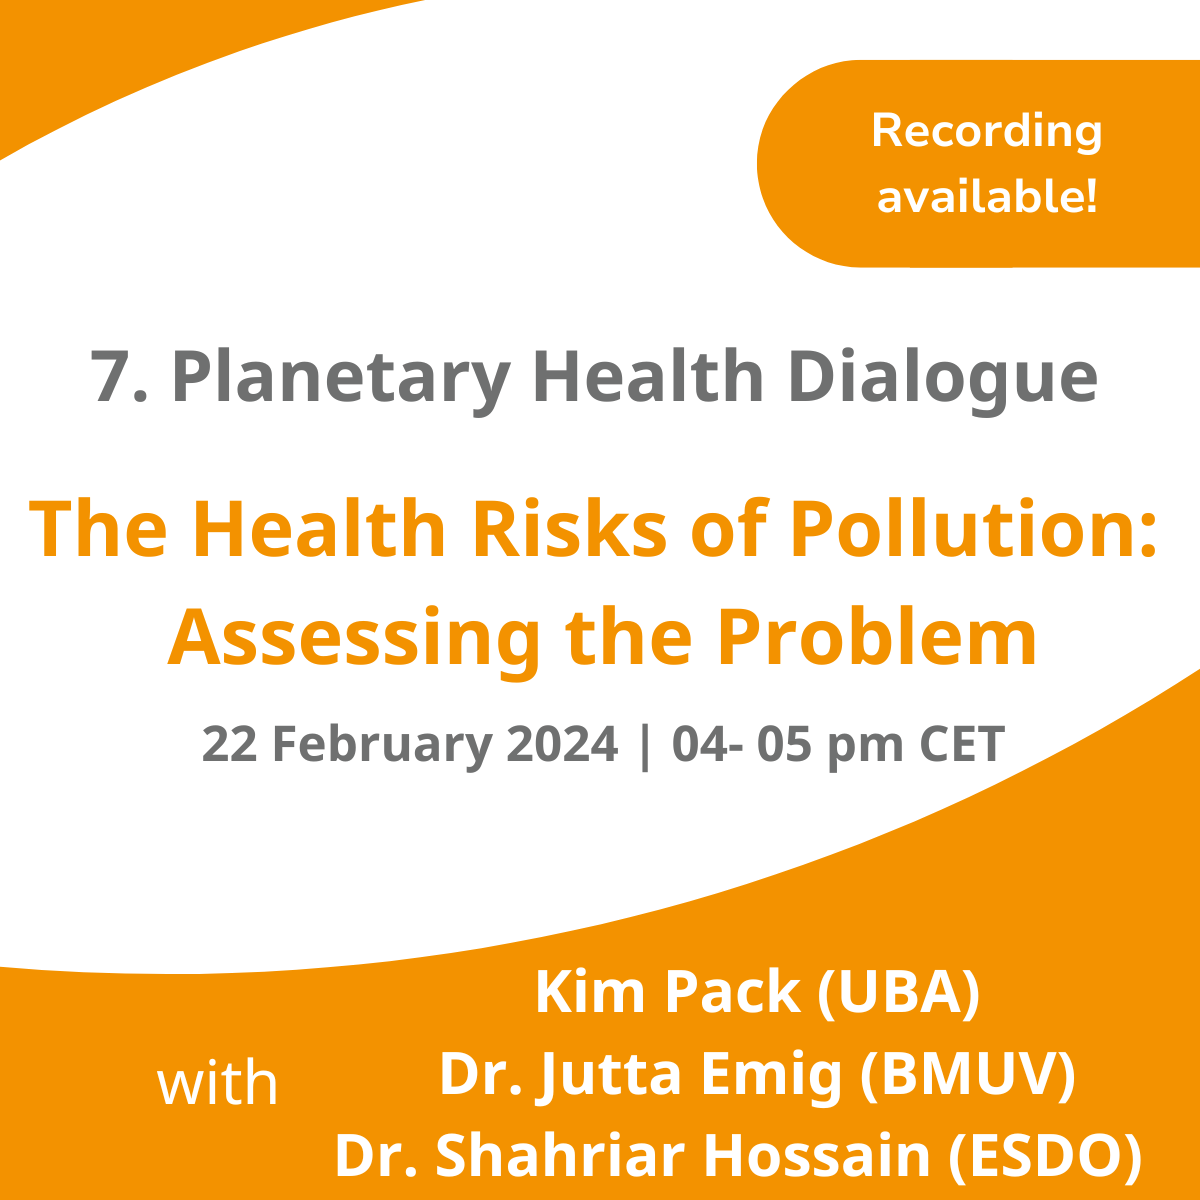 Recording: Planetary Health Dialogue – The Health Risks of Pollution: Assessing the Problem